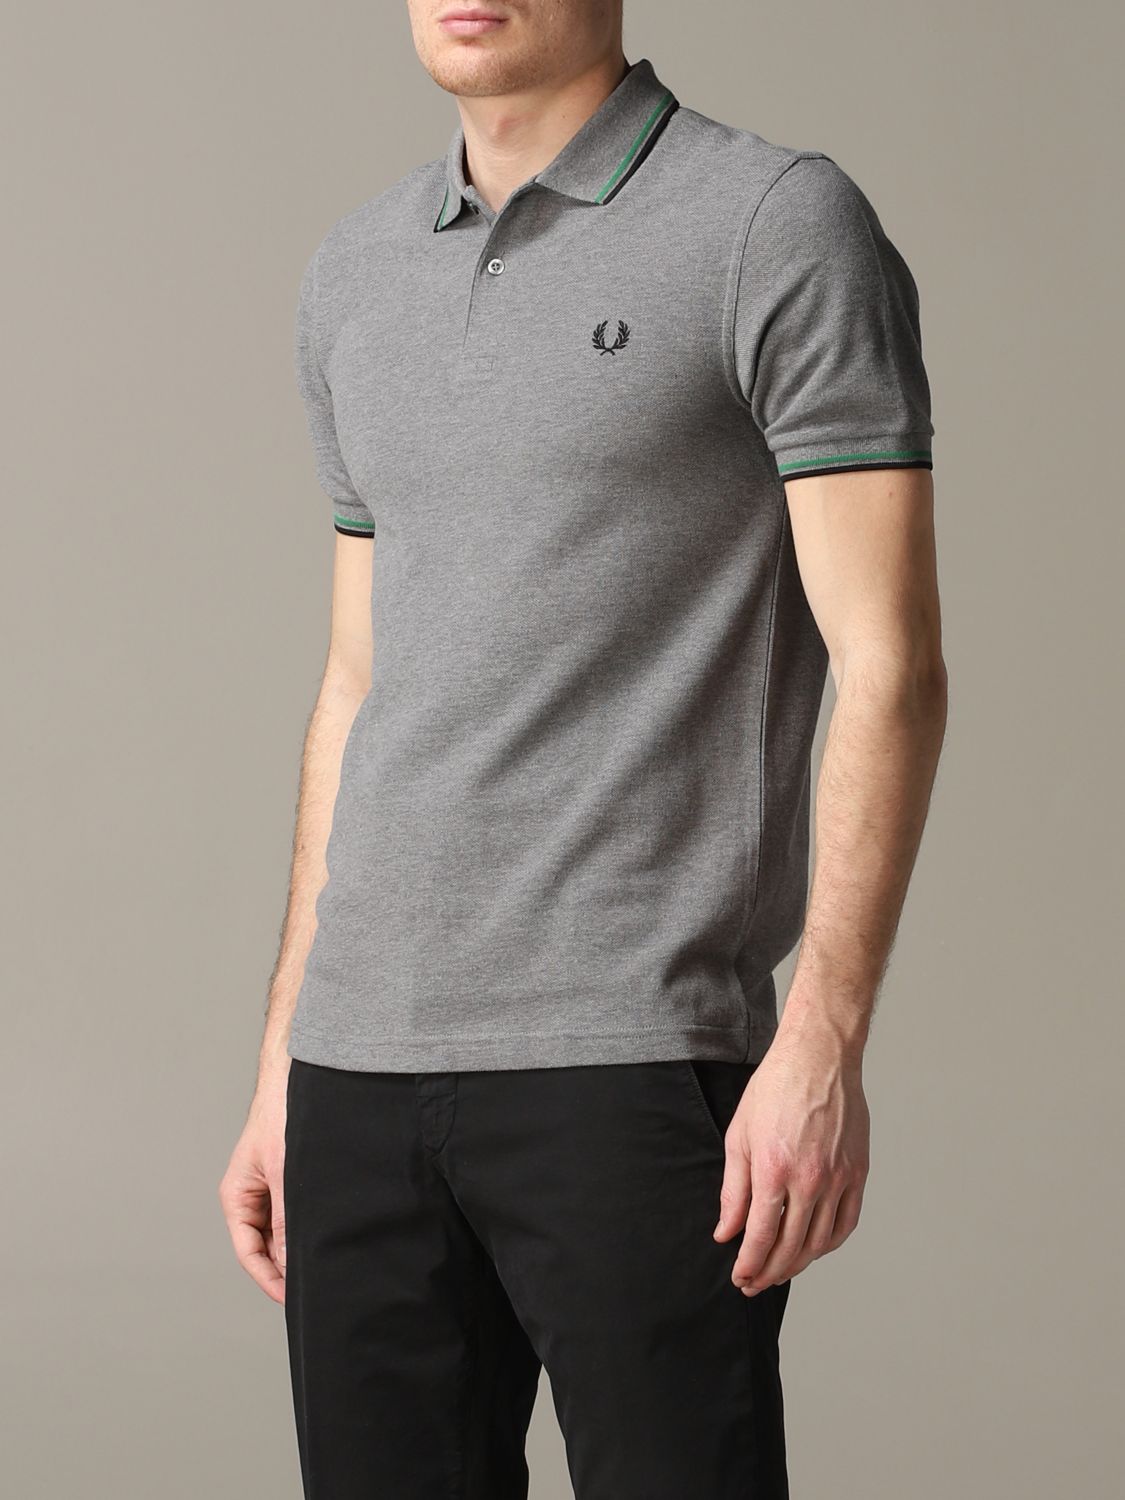 T-shirt men Fred Perry | Polo Shirt Fred Perry Men Grey | Polo Shirt ...